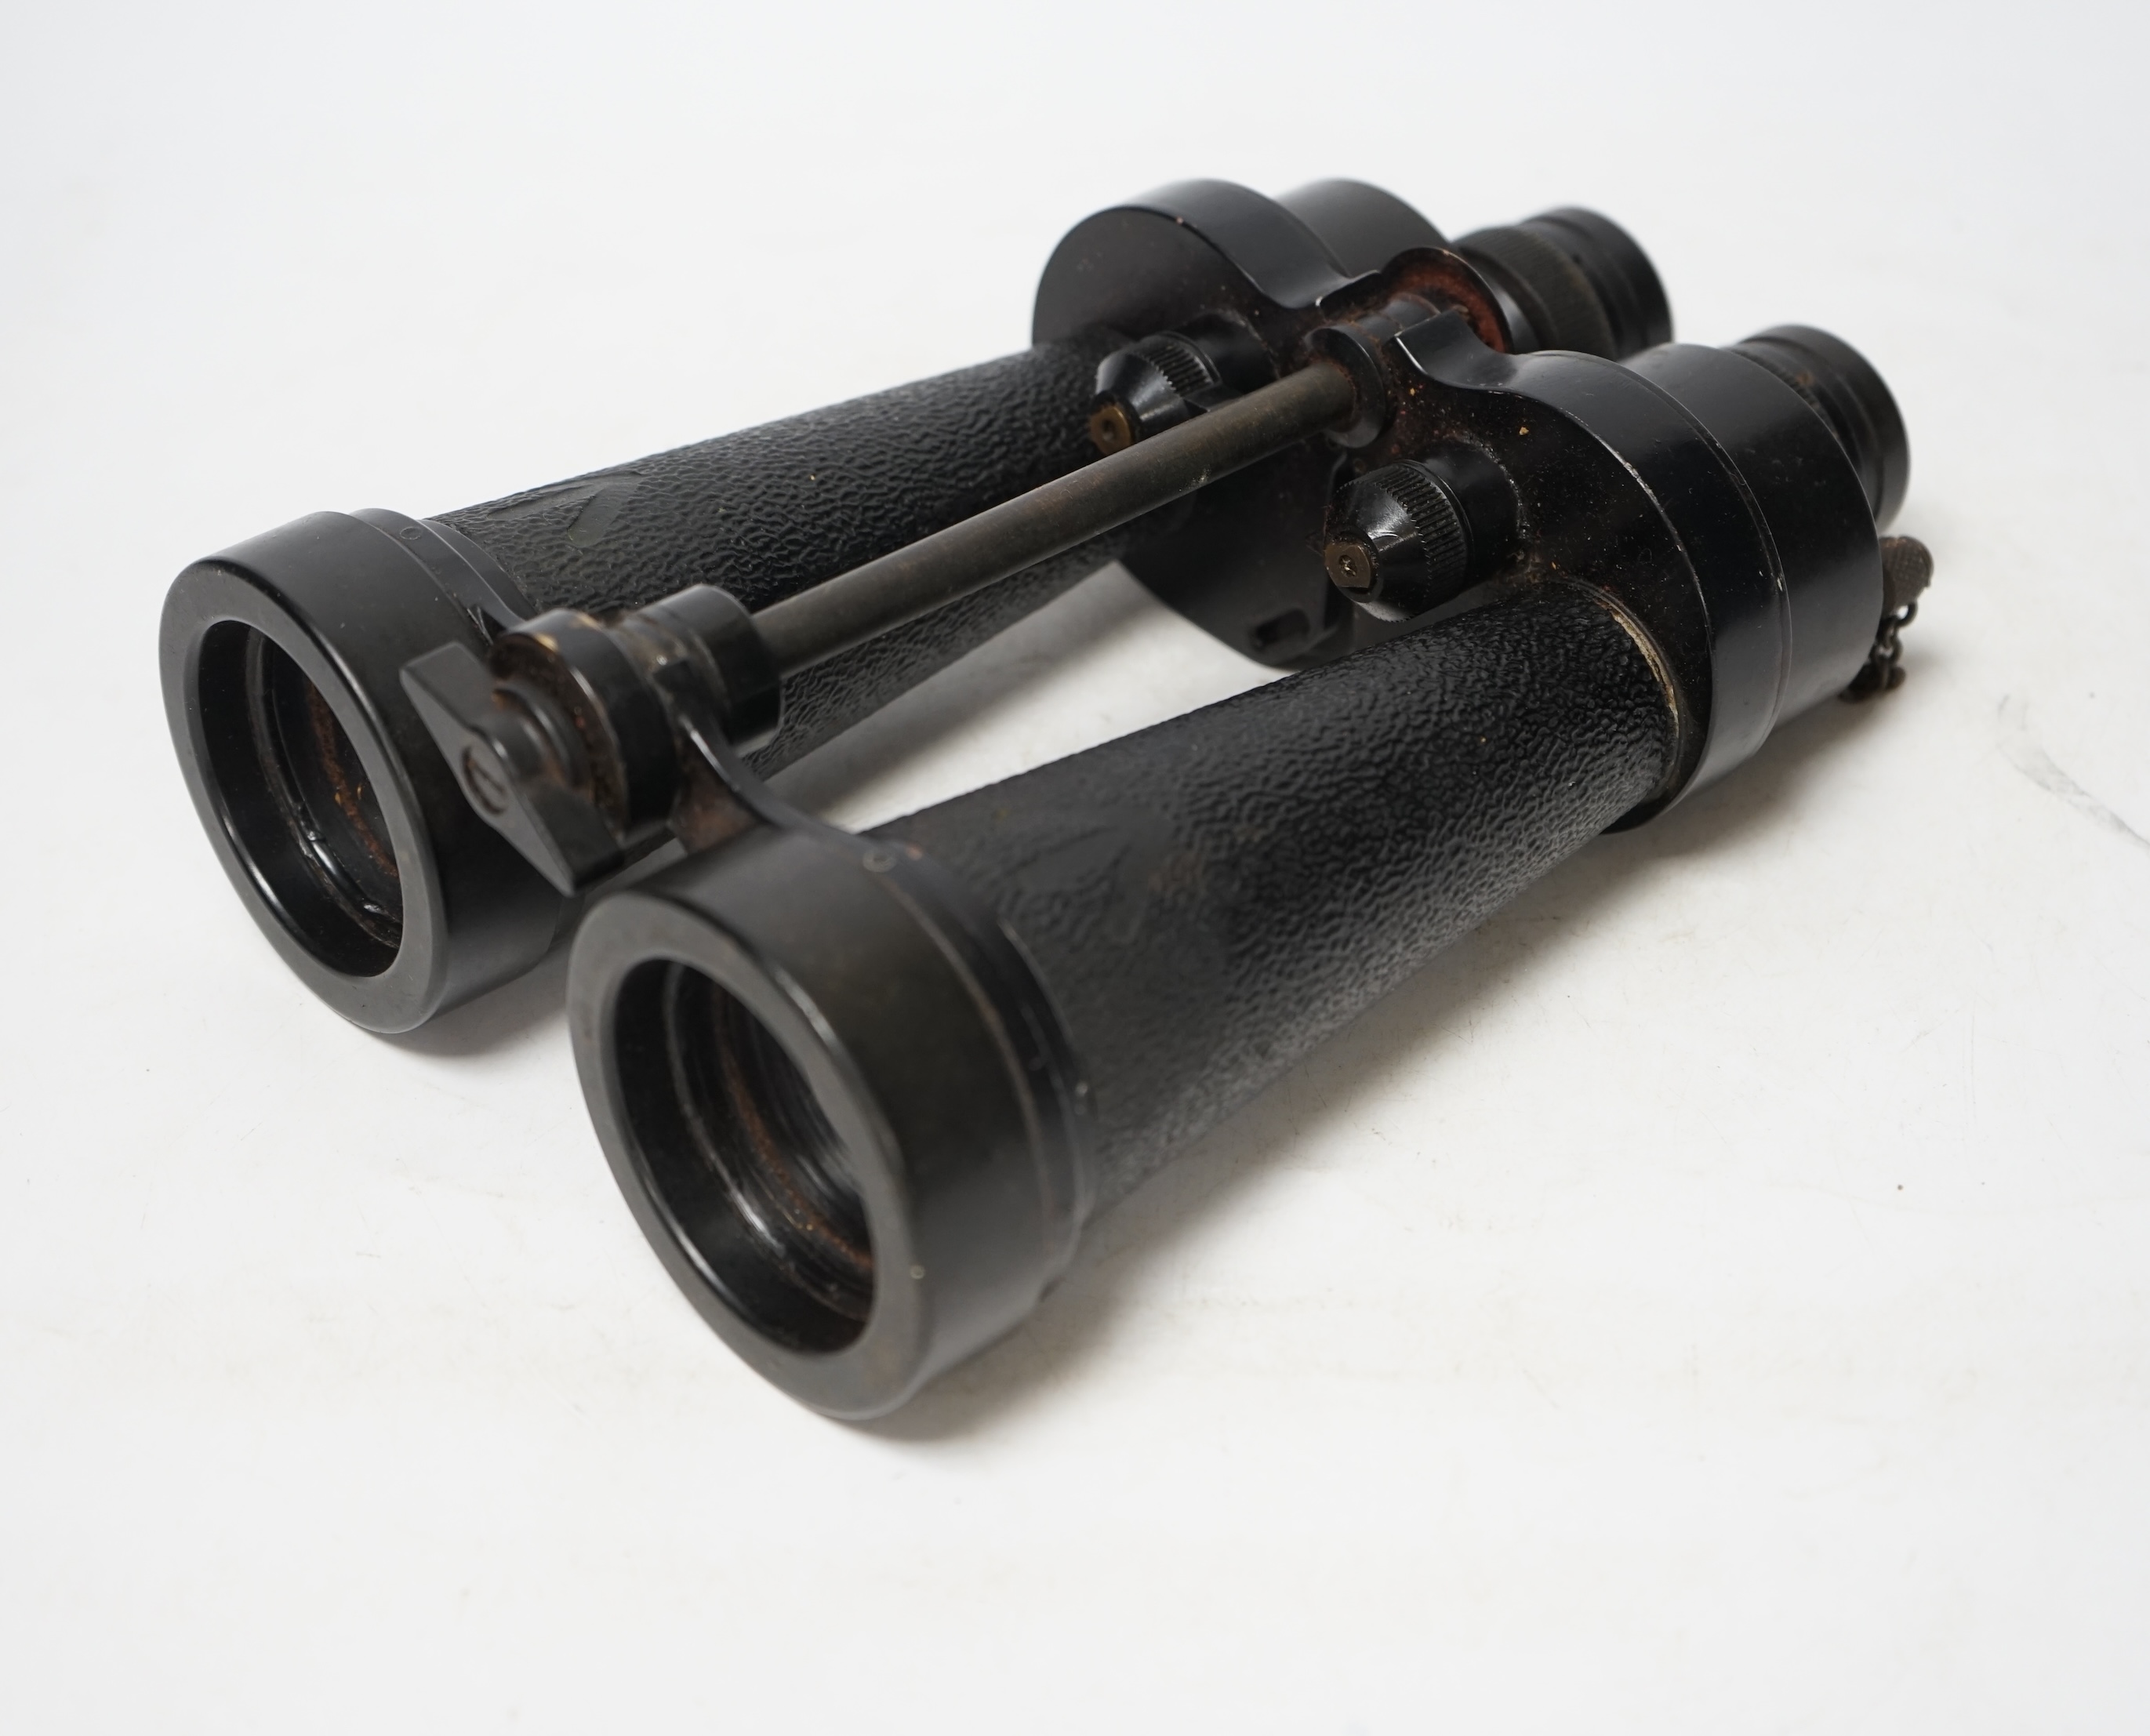 A pair of brown leather cased WWII Naval binoculars, Barr & Stroud, binoculars 24cm long, Condition - leather shoulder strap missing, front strap worn from use, binoculars appear good/used